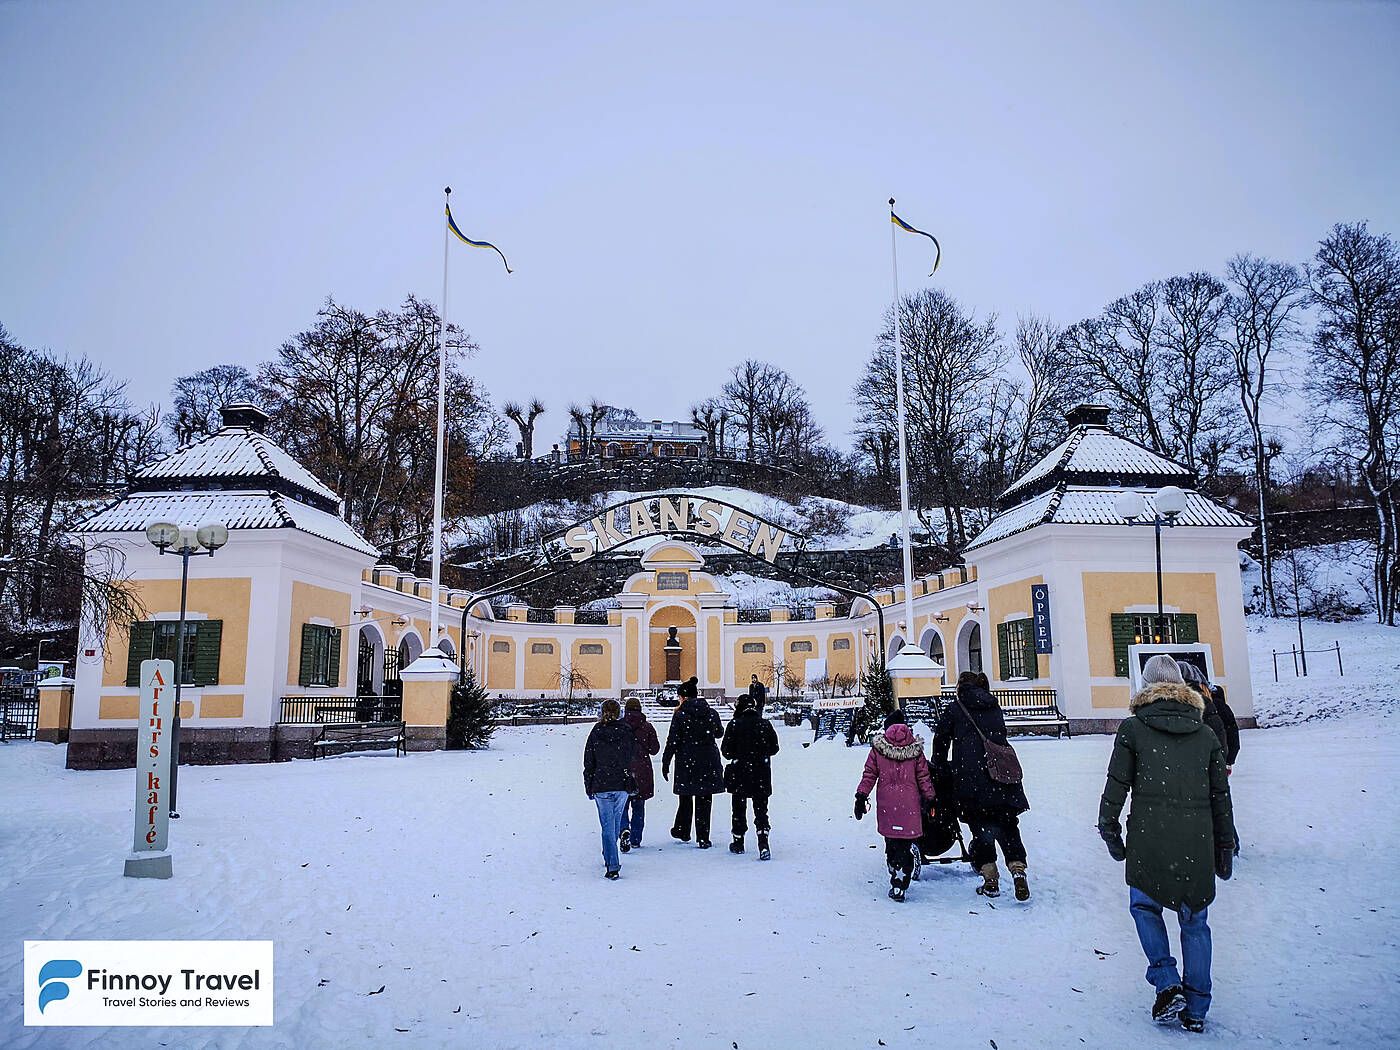 The other entrance of Skansen